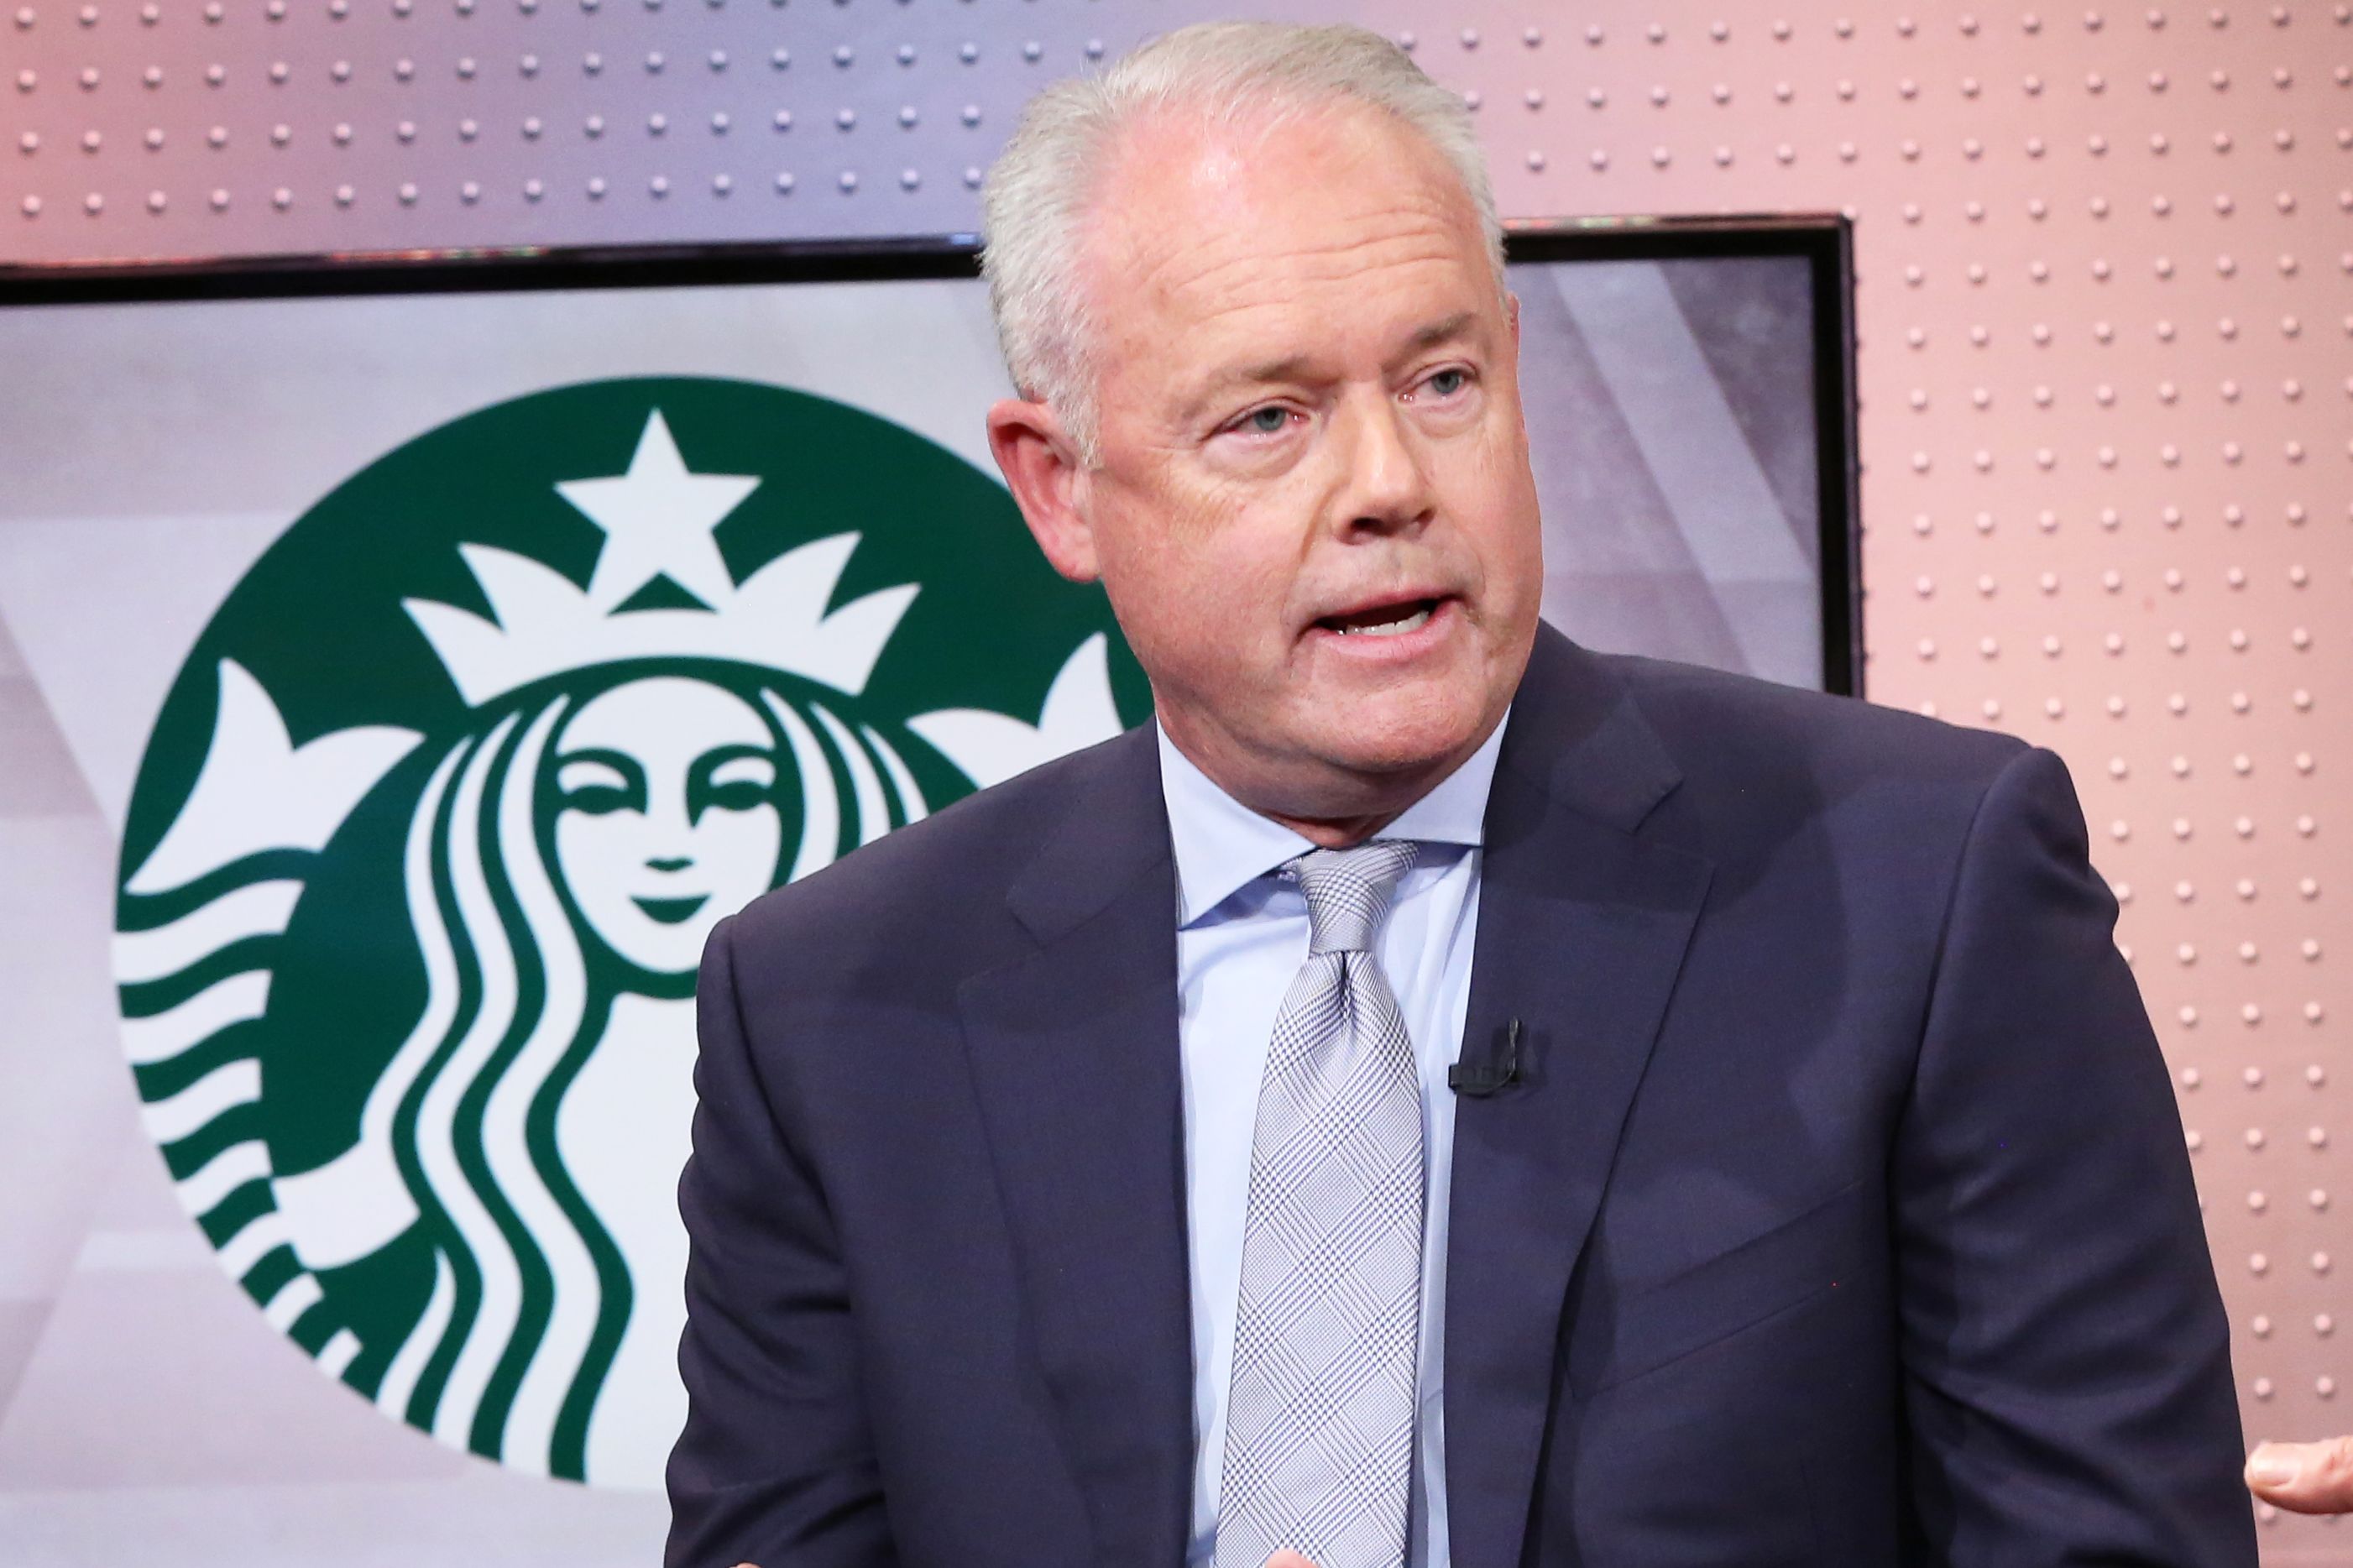 Starbucks CEO says after Hong Kong protests ‘focus’ is on worker security